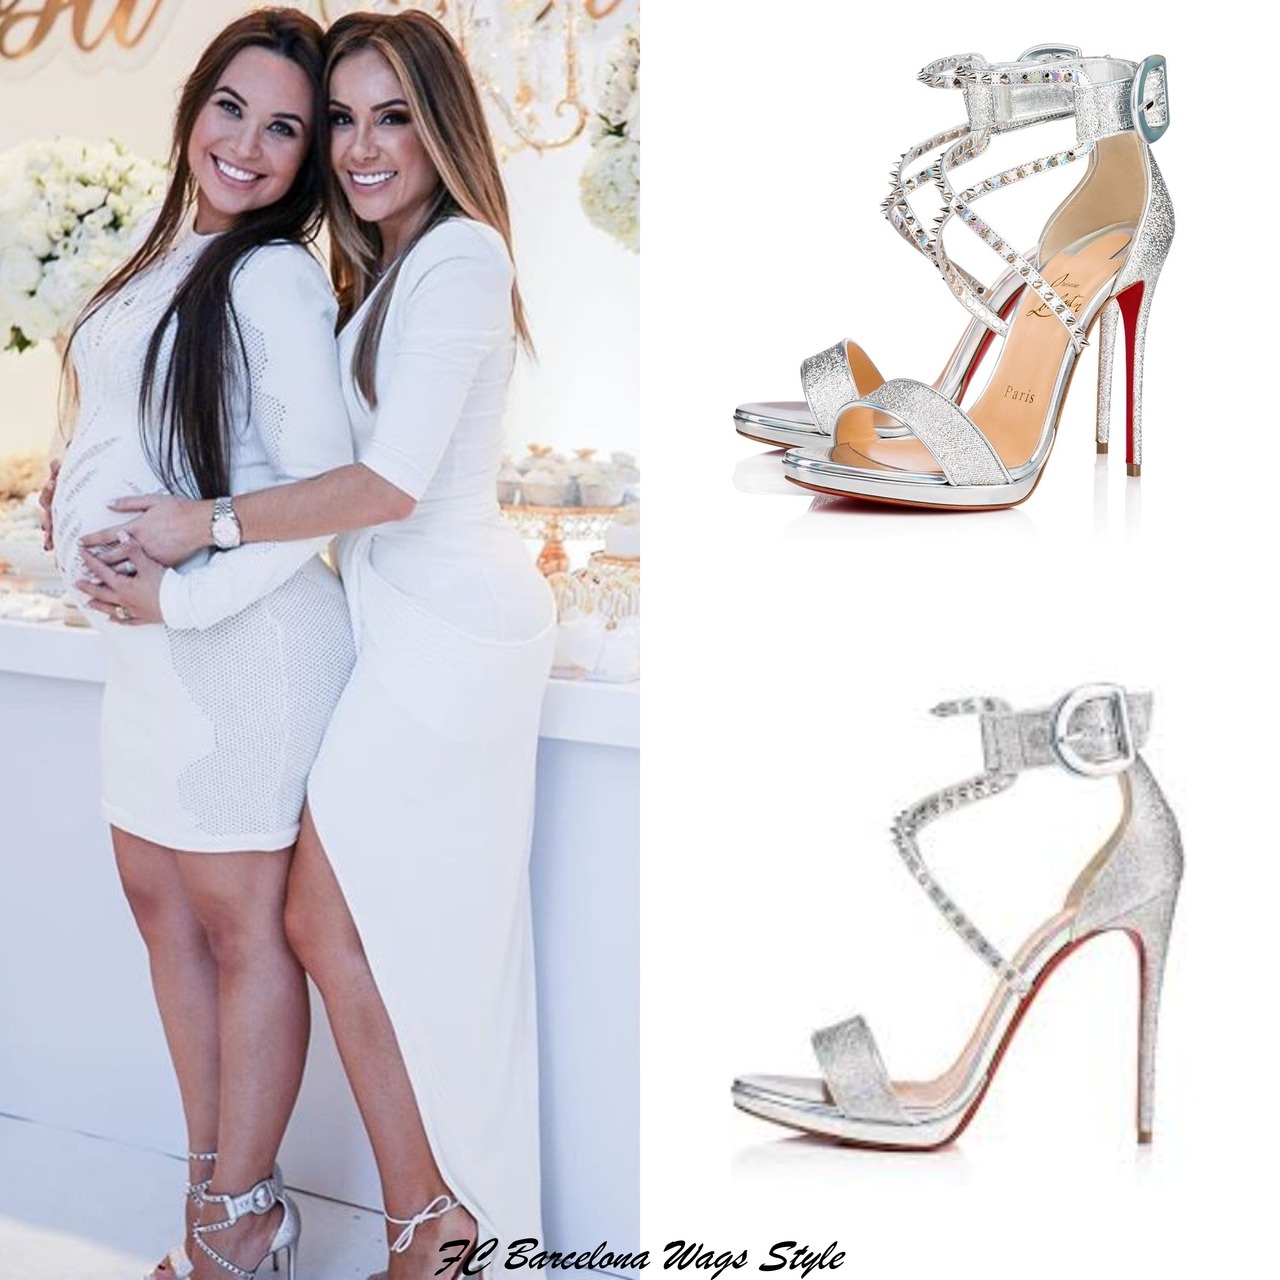 FC Barcelona WAGS Style — Aine wore pair of Christian Louboutin Choca...